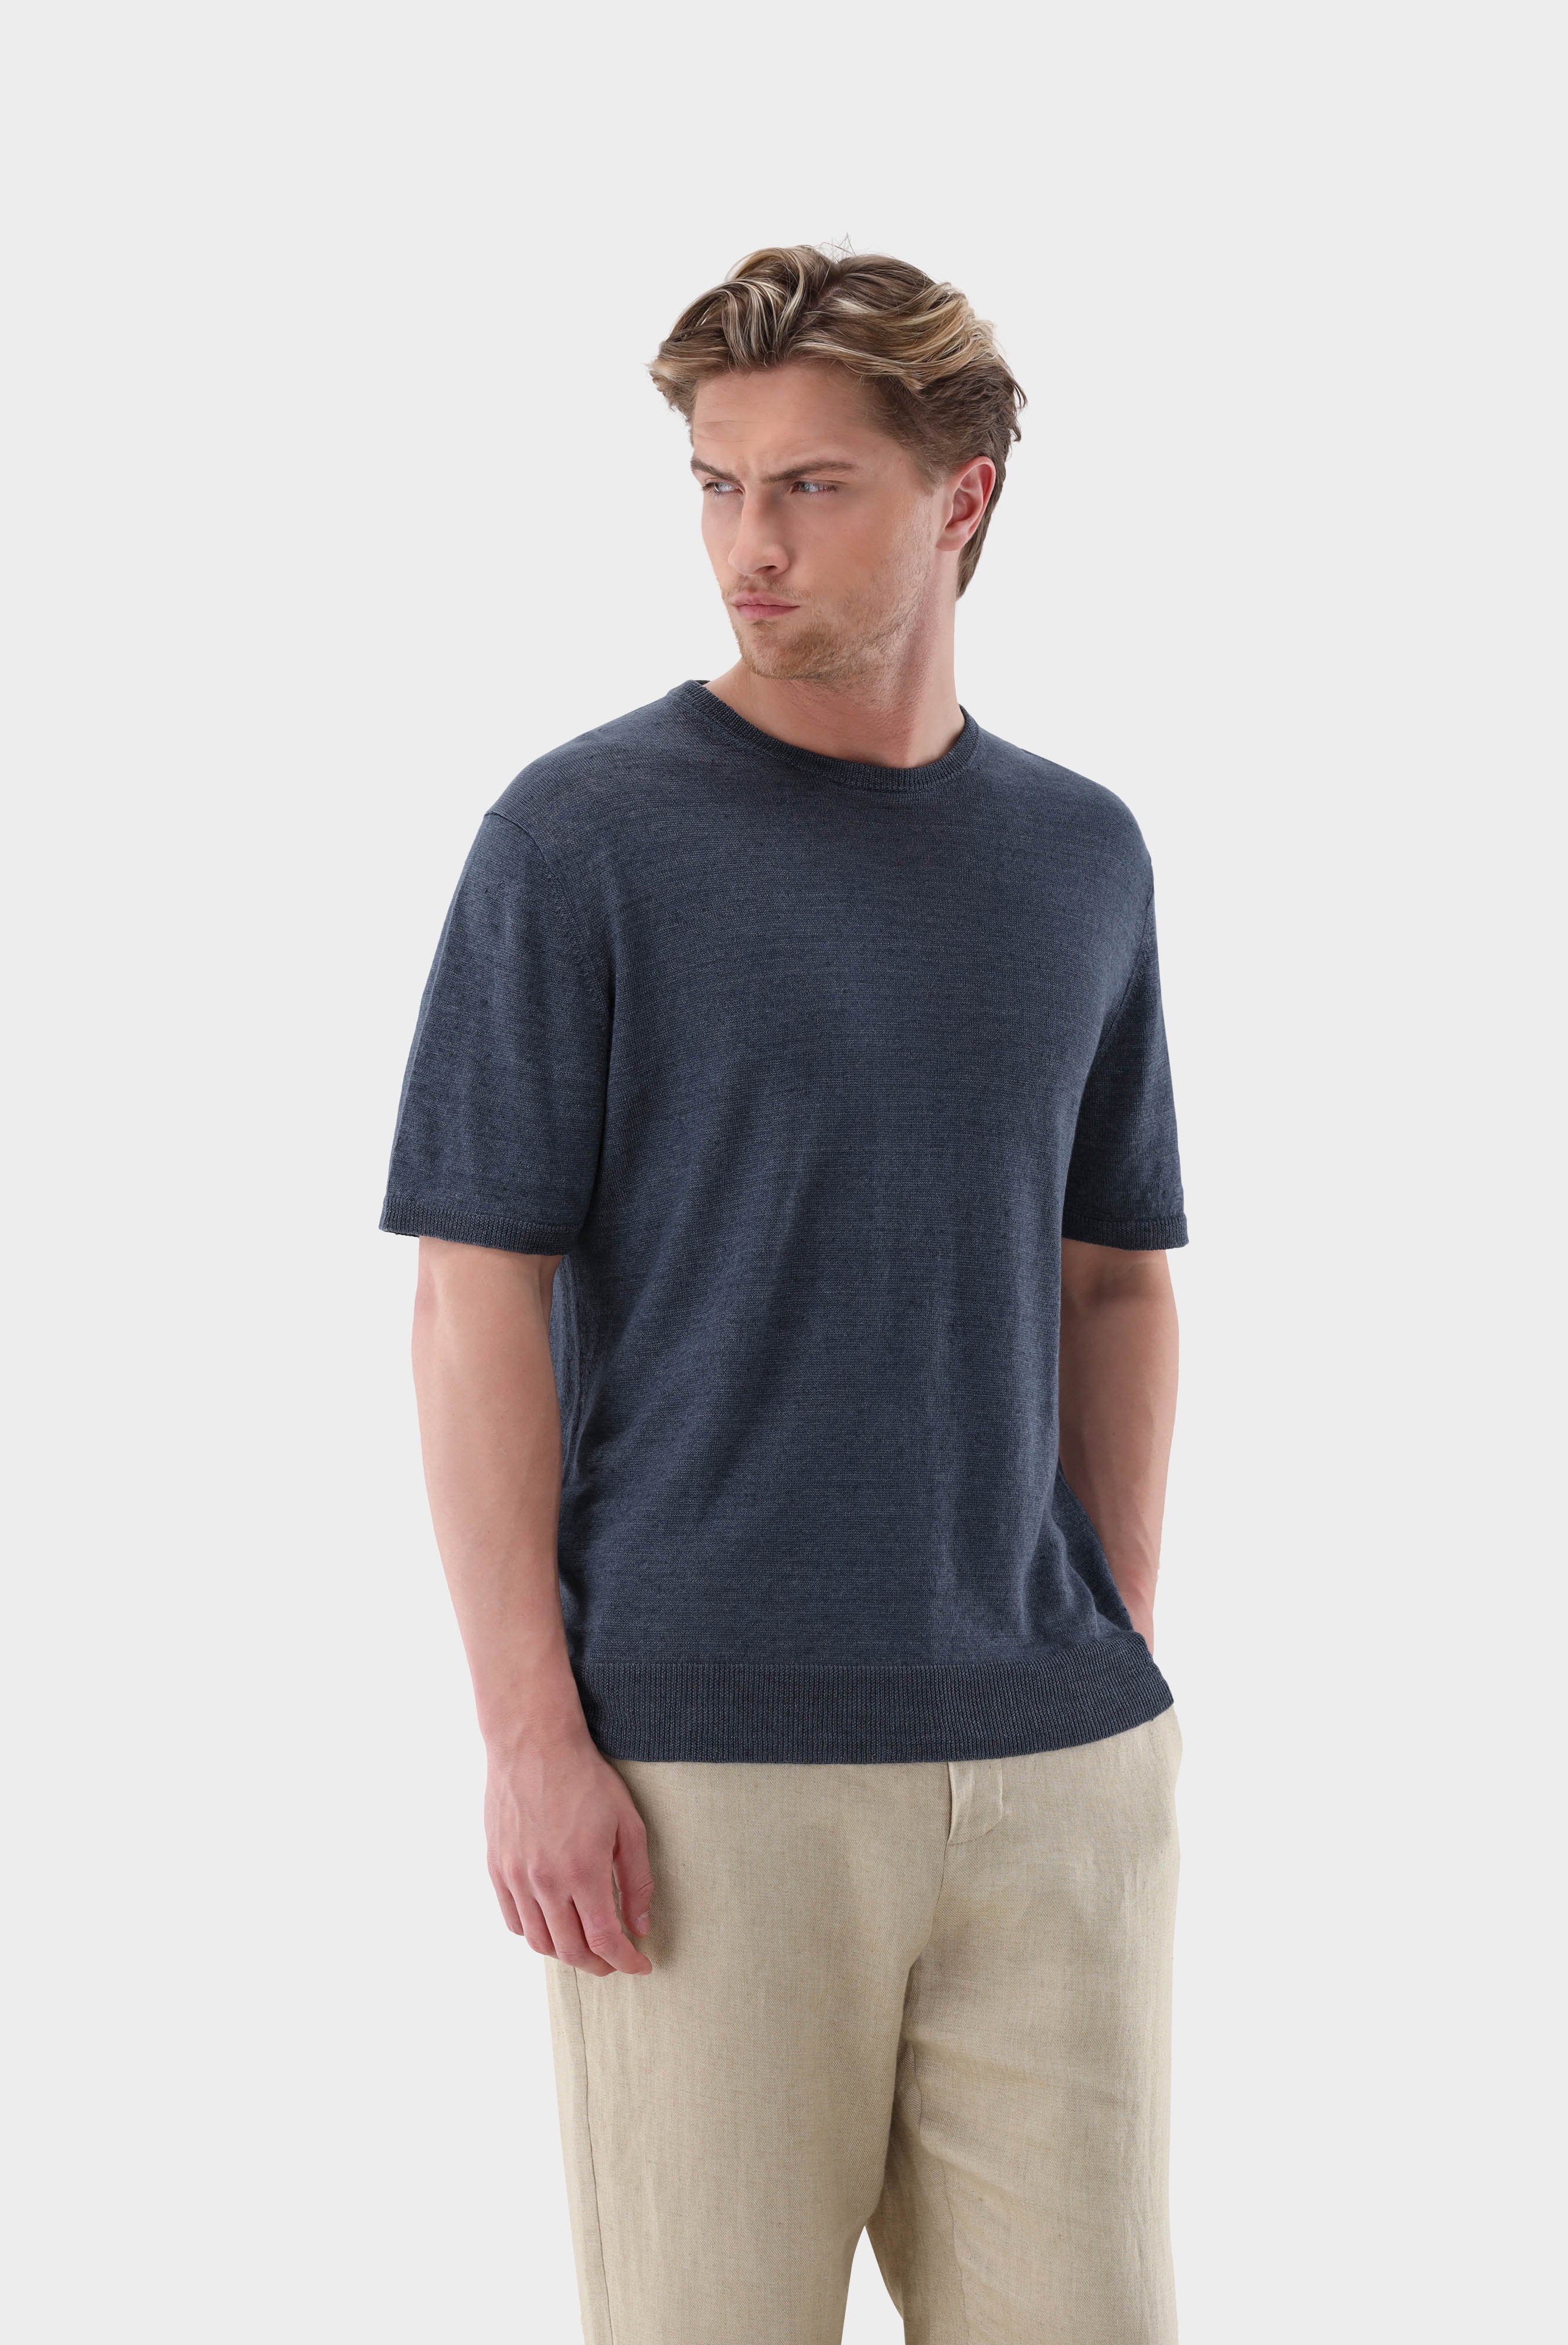 Sweaters & Cardigans+Knit T-Shirt in Linen+82.8650..S00169.760.S